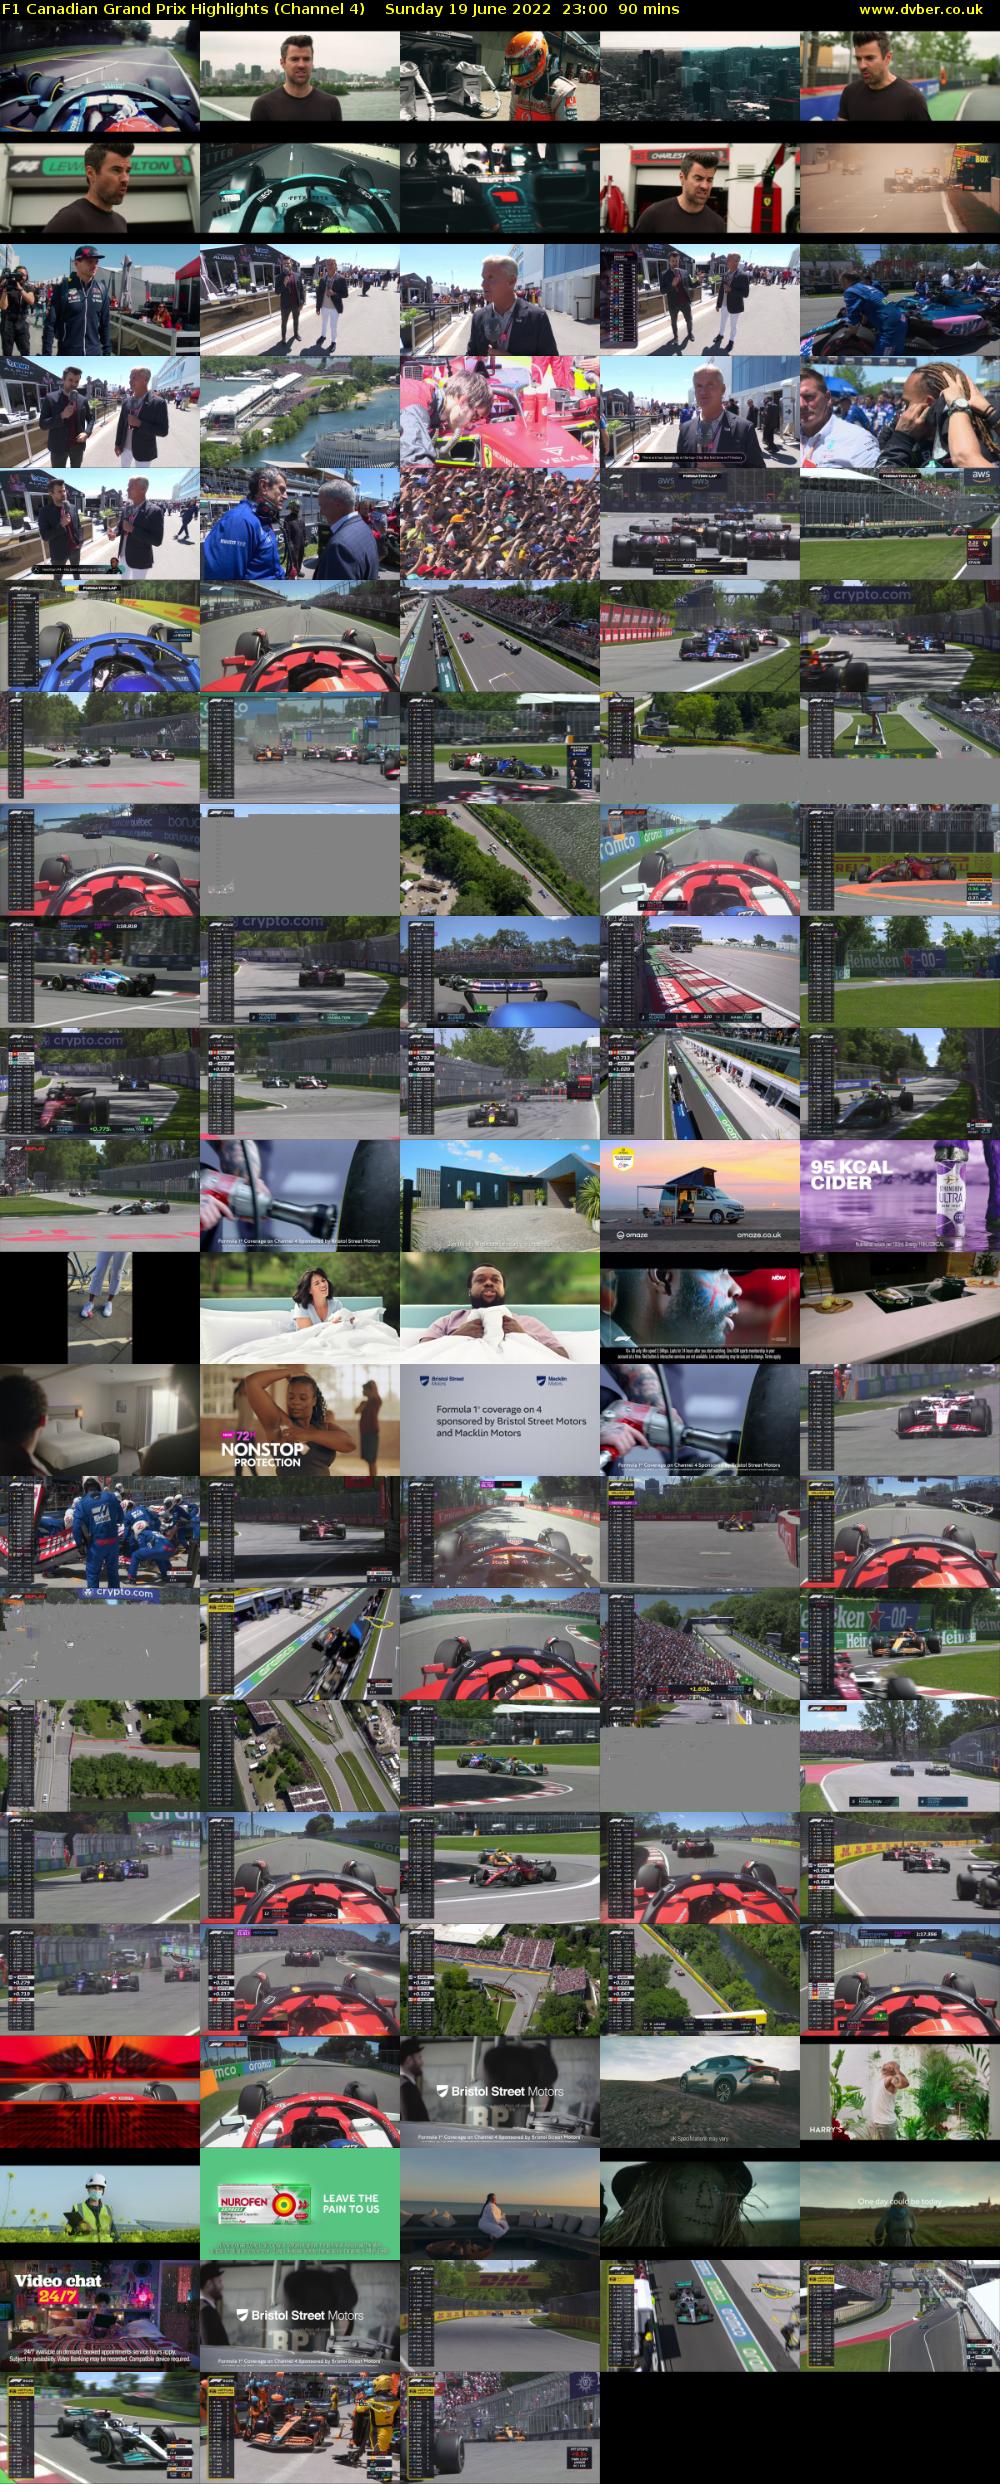 F1 Canadian Grand Prix Highlights (Channel 4) Sunday 19 June 2022 23:00 - 00:30